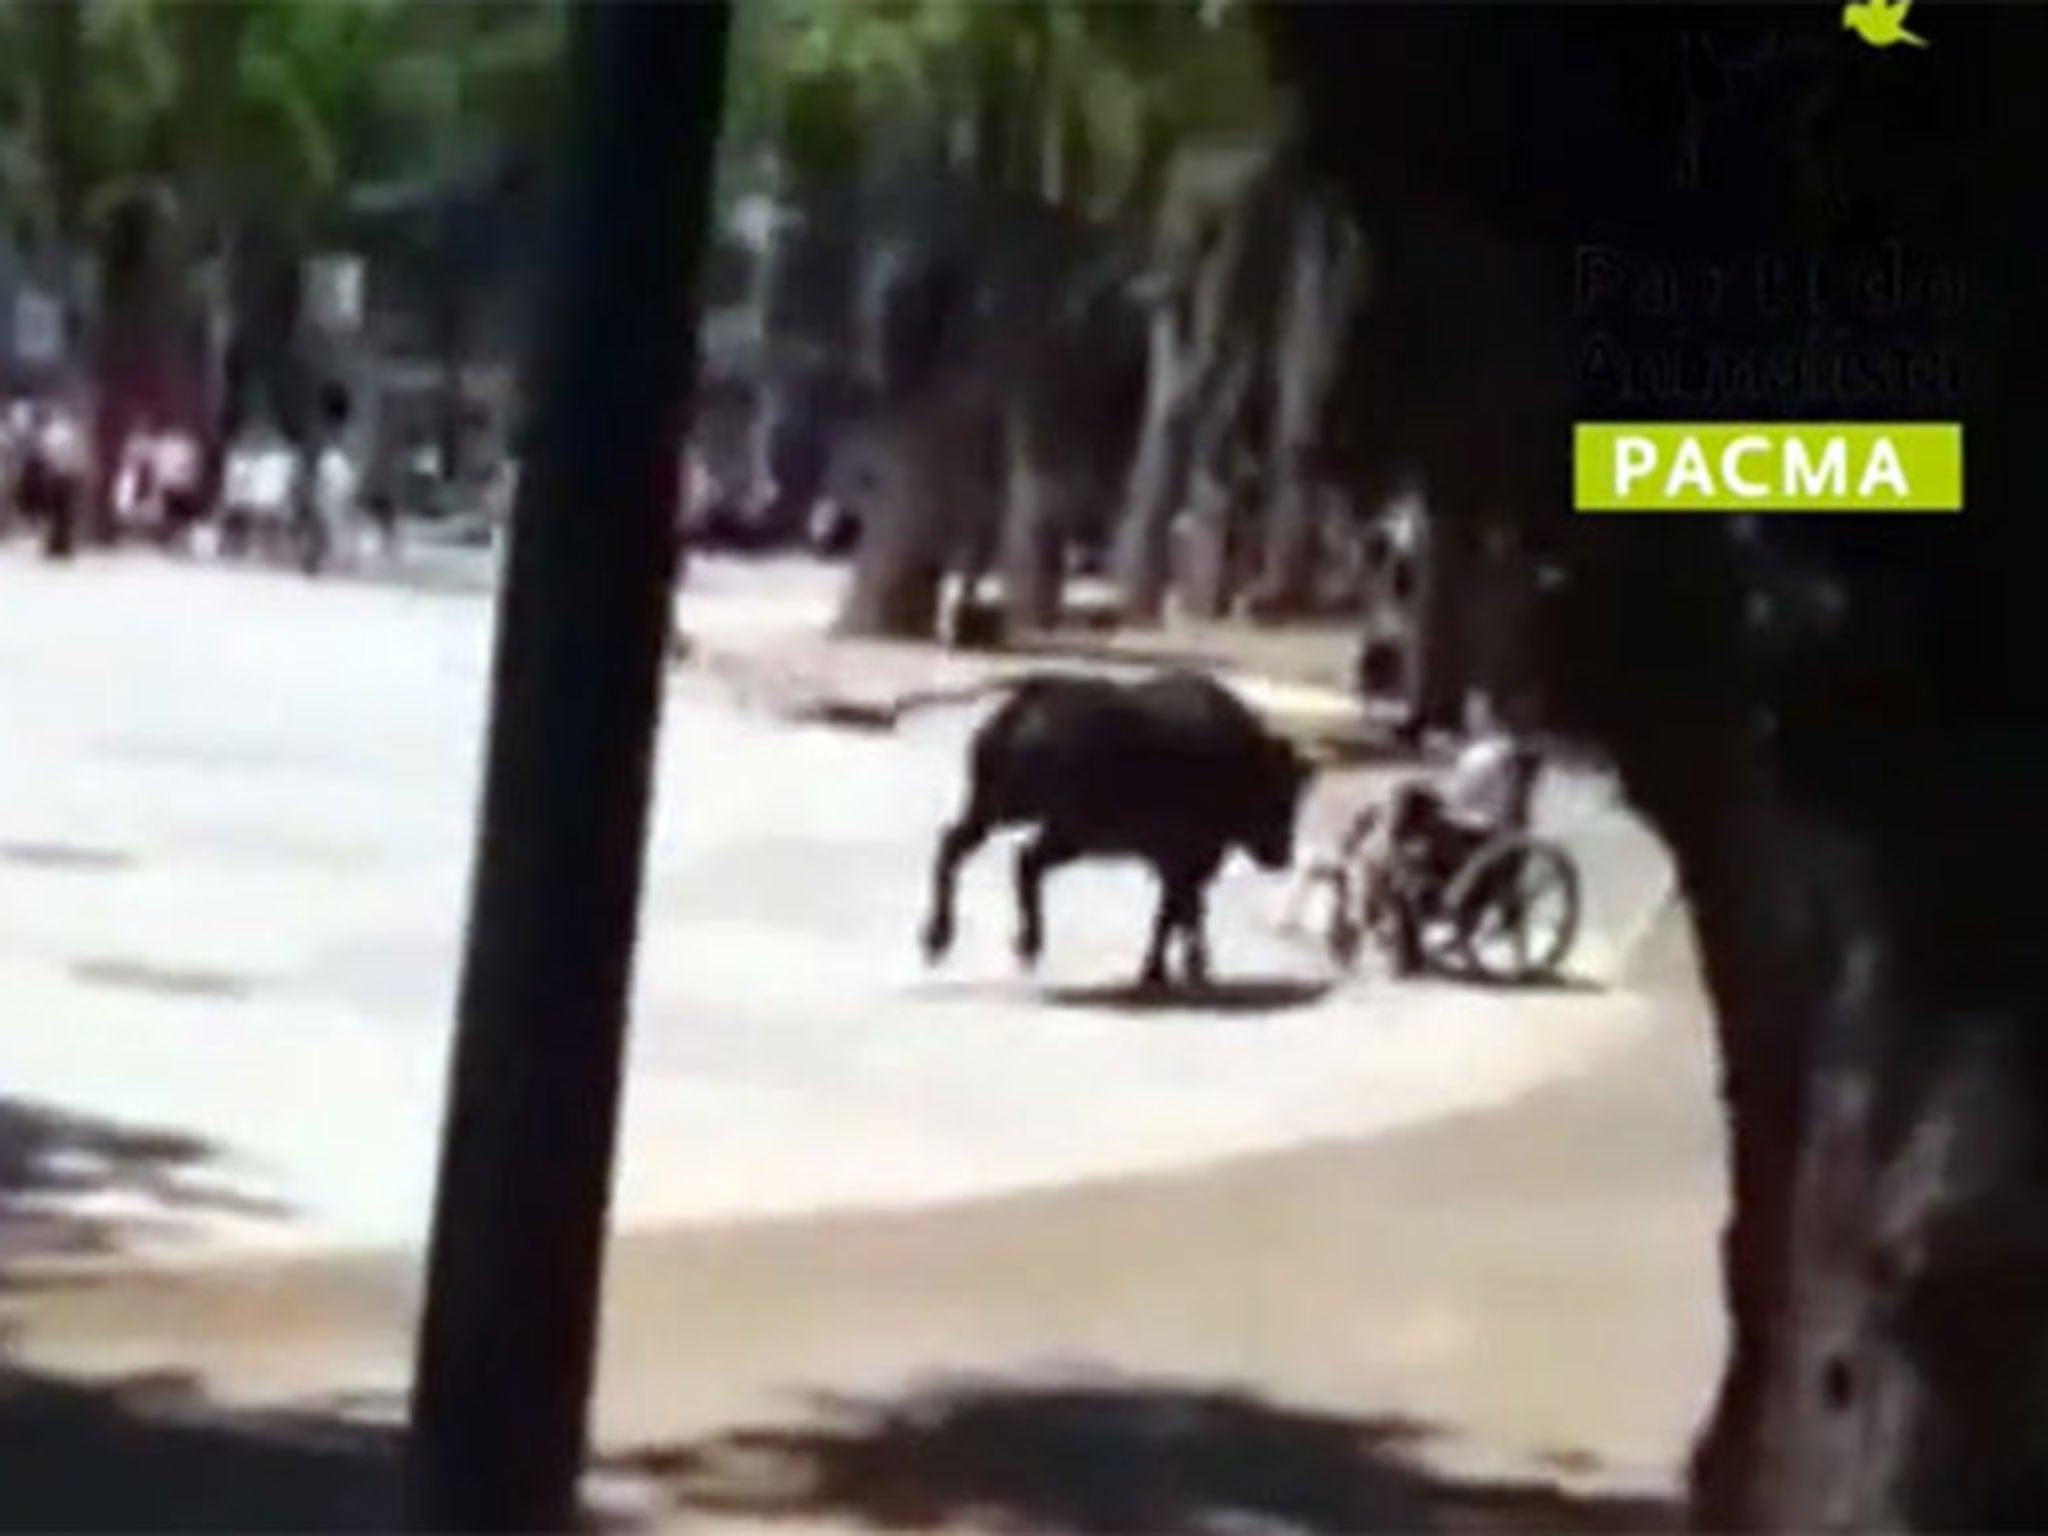 The bull smashed into the boy on his wheelchair